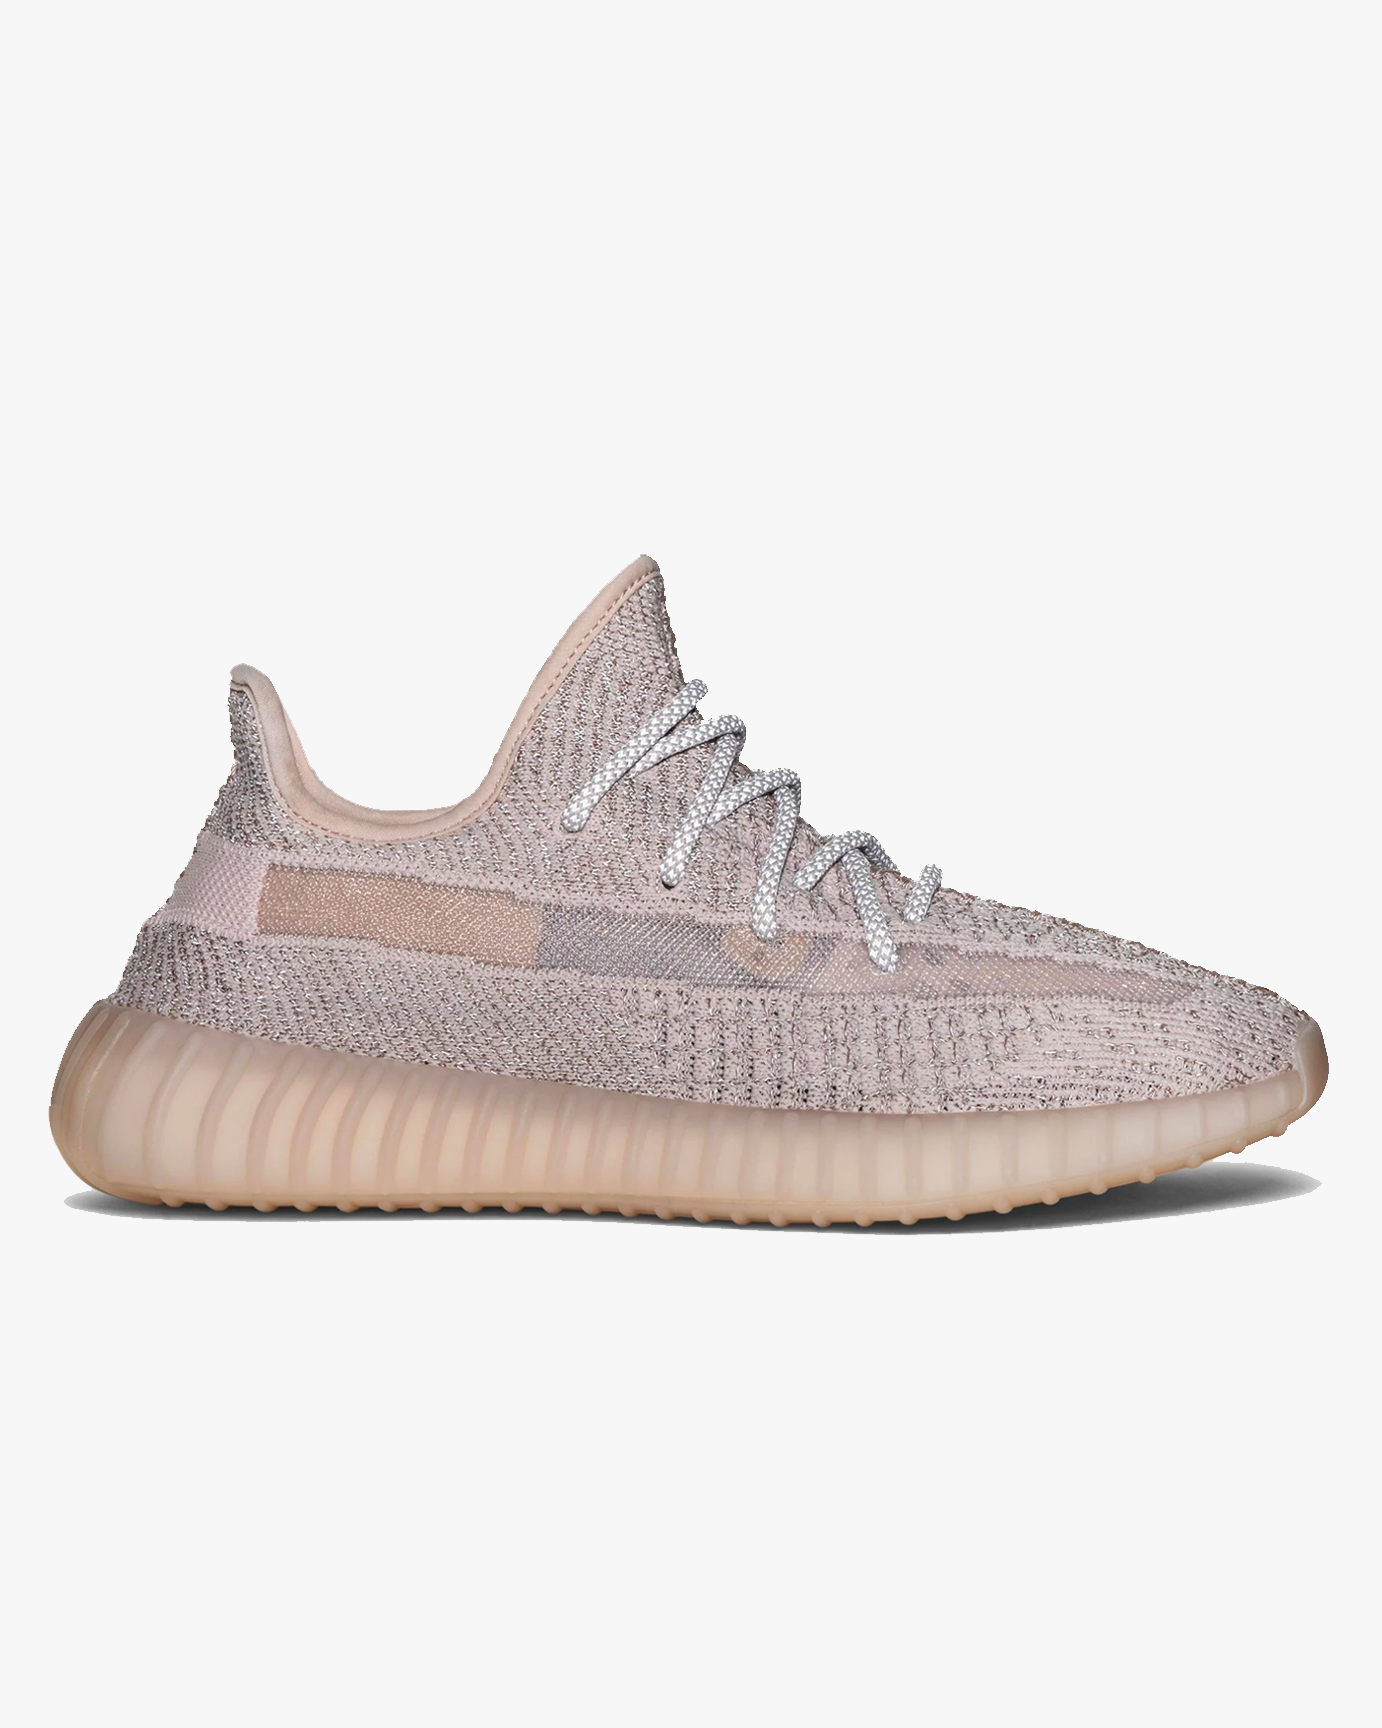 Yeezy Boost 350 V2 'Synth Reflective' | RARE LAB